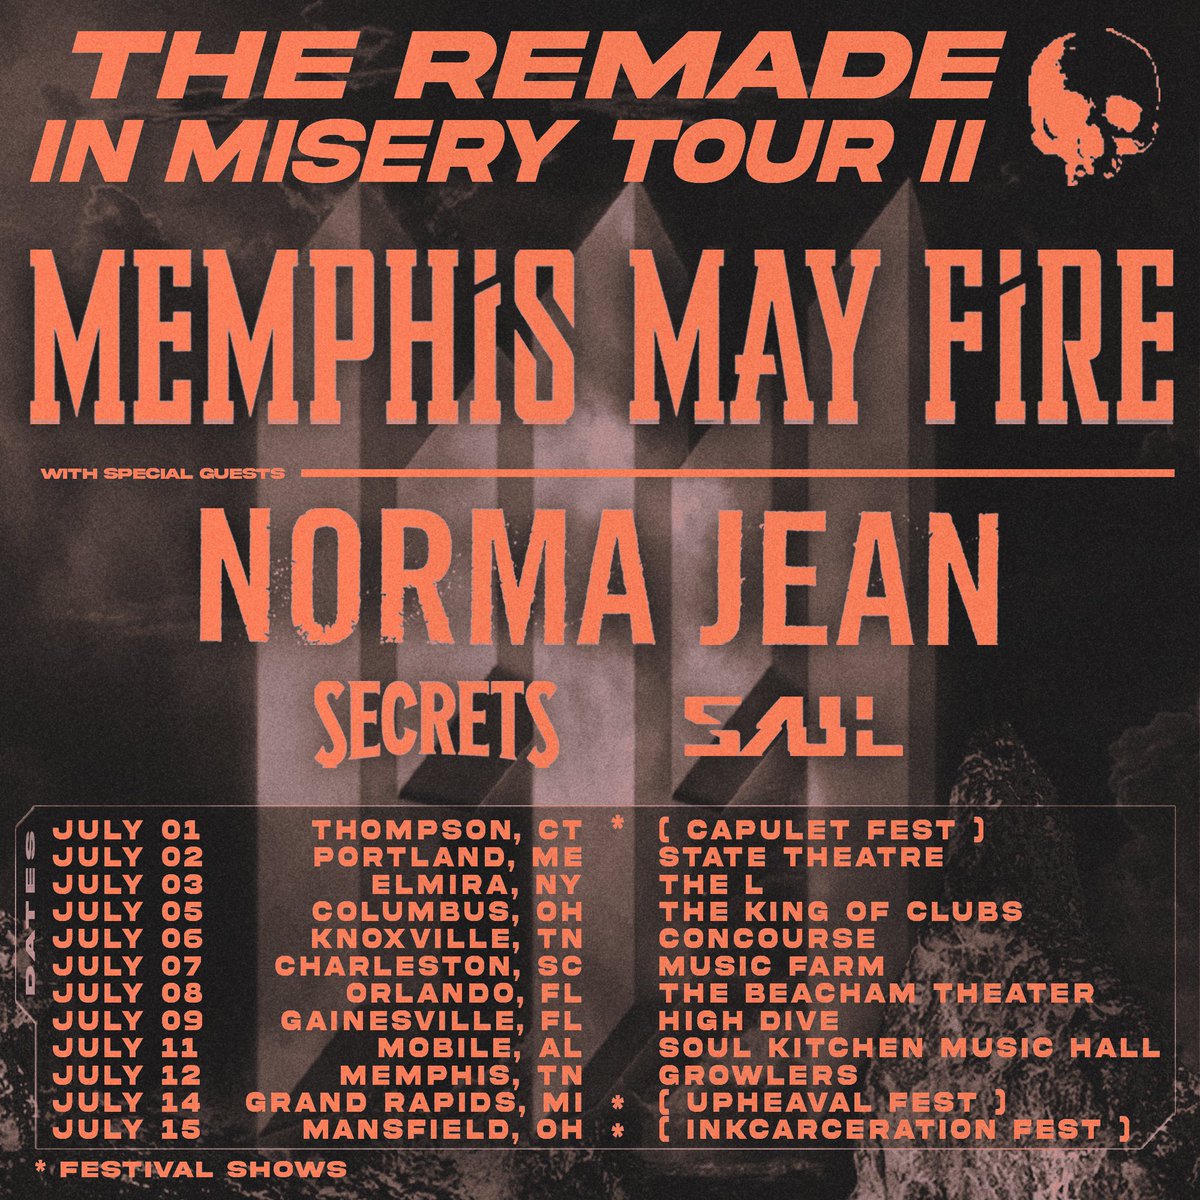 Norma Jean will be supporting @MemphisMayFire in JULY for The REMADE IN MISERY TOUR. Along with @SECRETSofficial and @saulband. Tickets on sale TOMORROW. ***not performing at Upheaval and Inkcarceration.